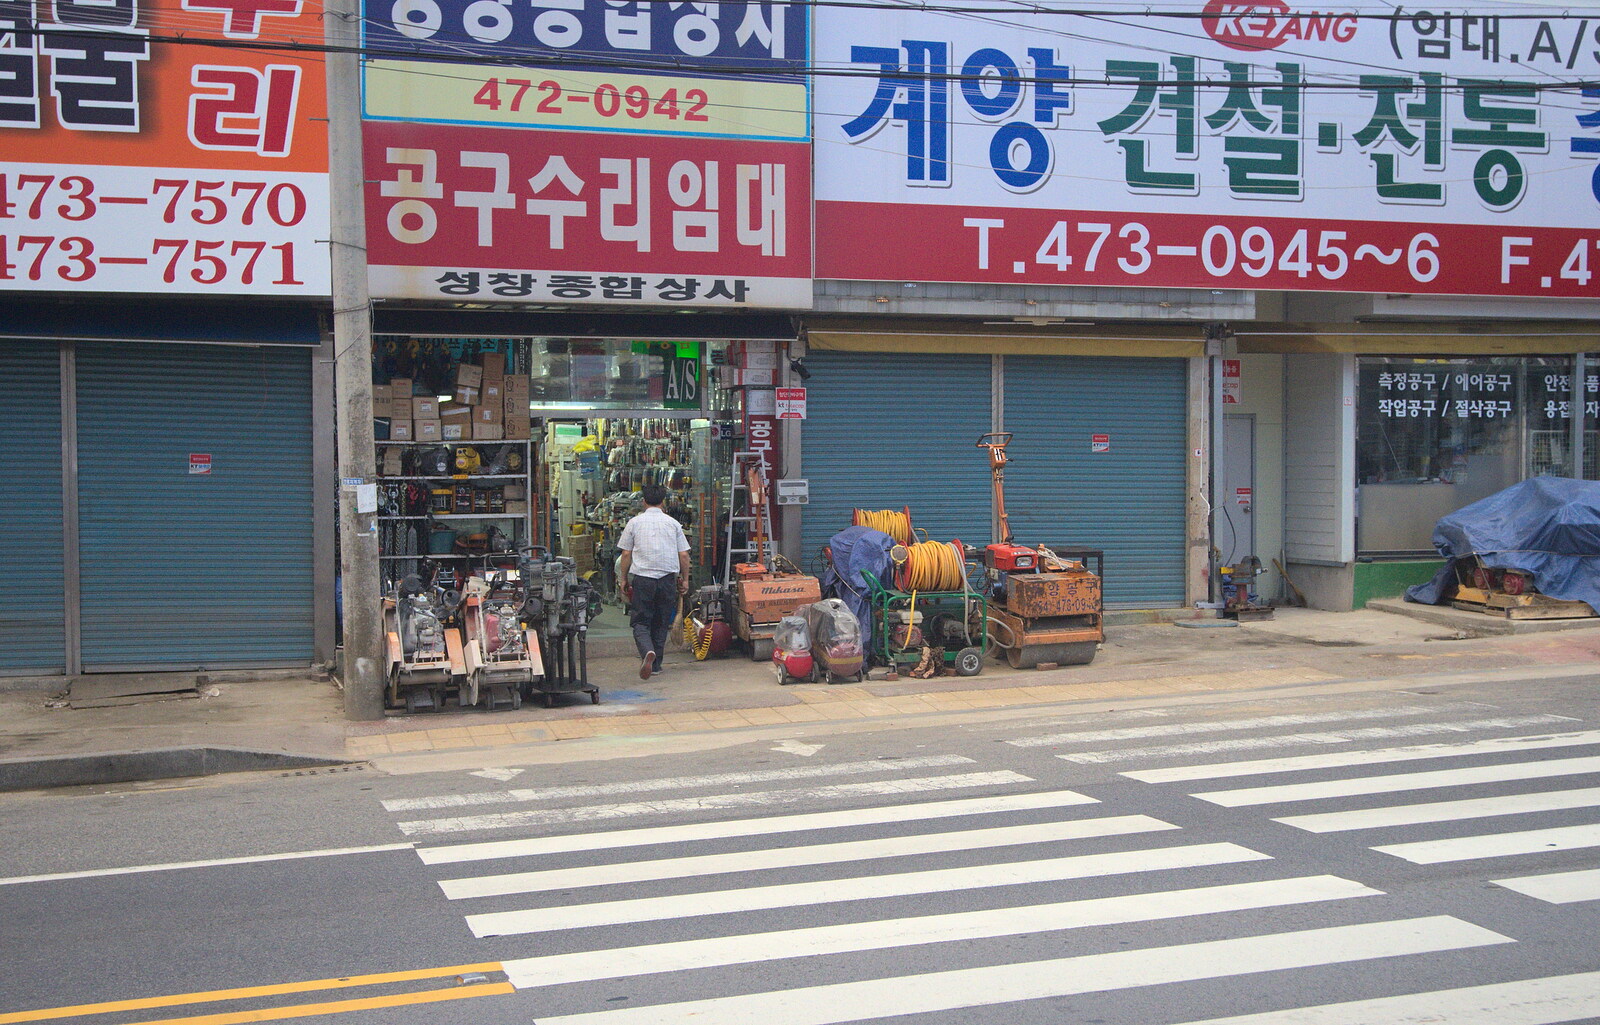 Some dude actually visits one of the shops from Working at Samsung, and Geumosan Mountain, Gumi, Gyeongsangbuk-do, Korea - 24th June 2012